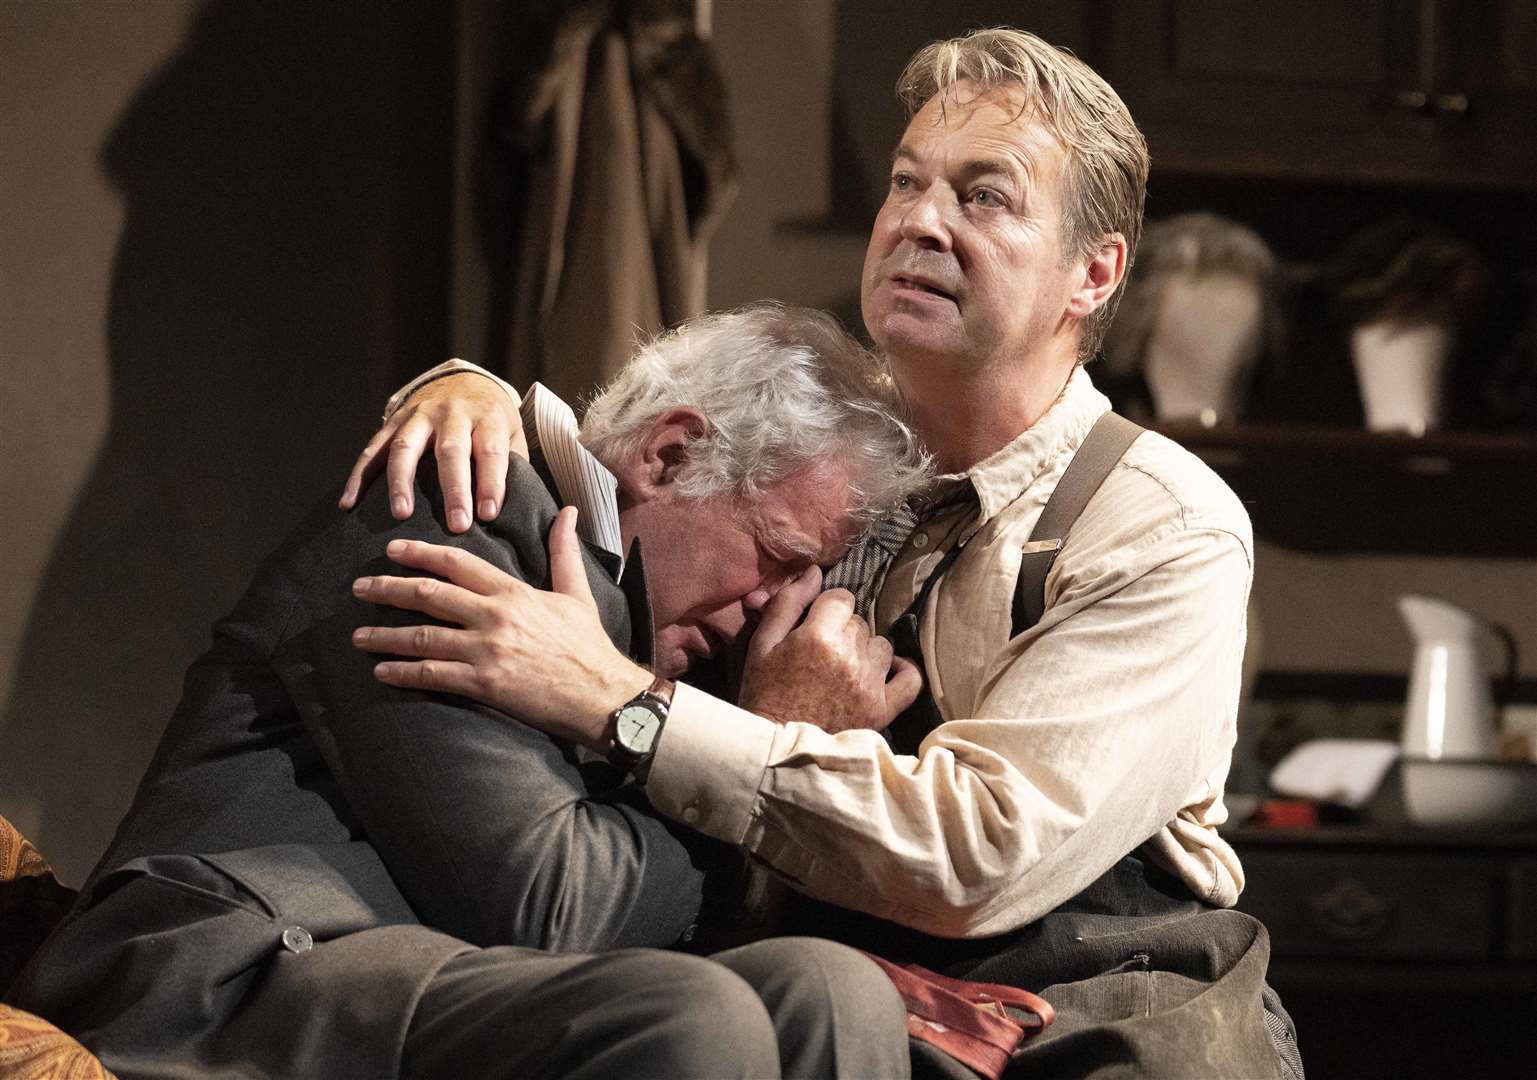 Julian Clary as Norman and Matthew Kelly as Sir in The Dresser Picture: Alastair Muir